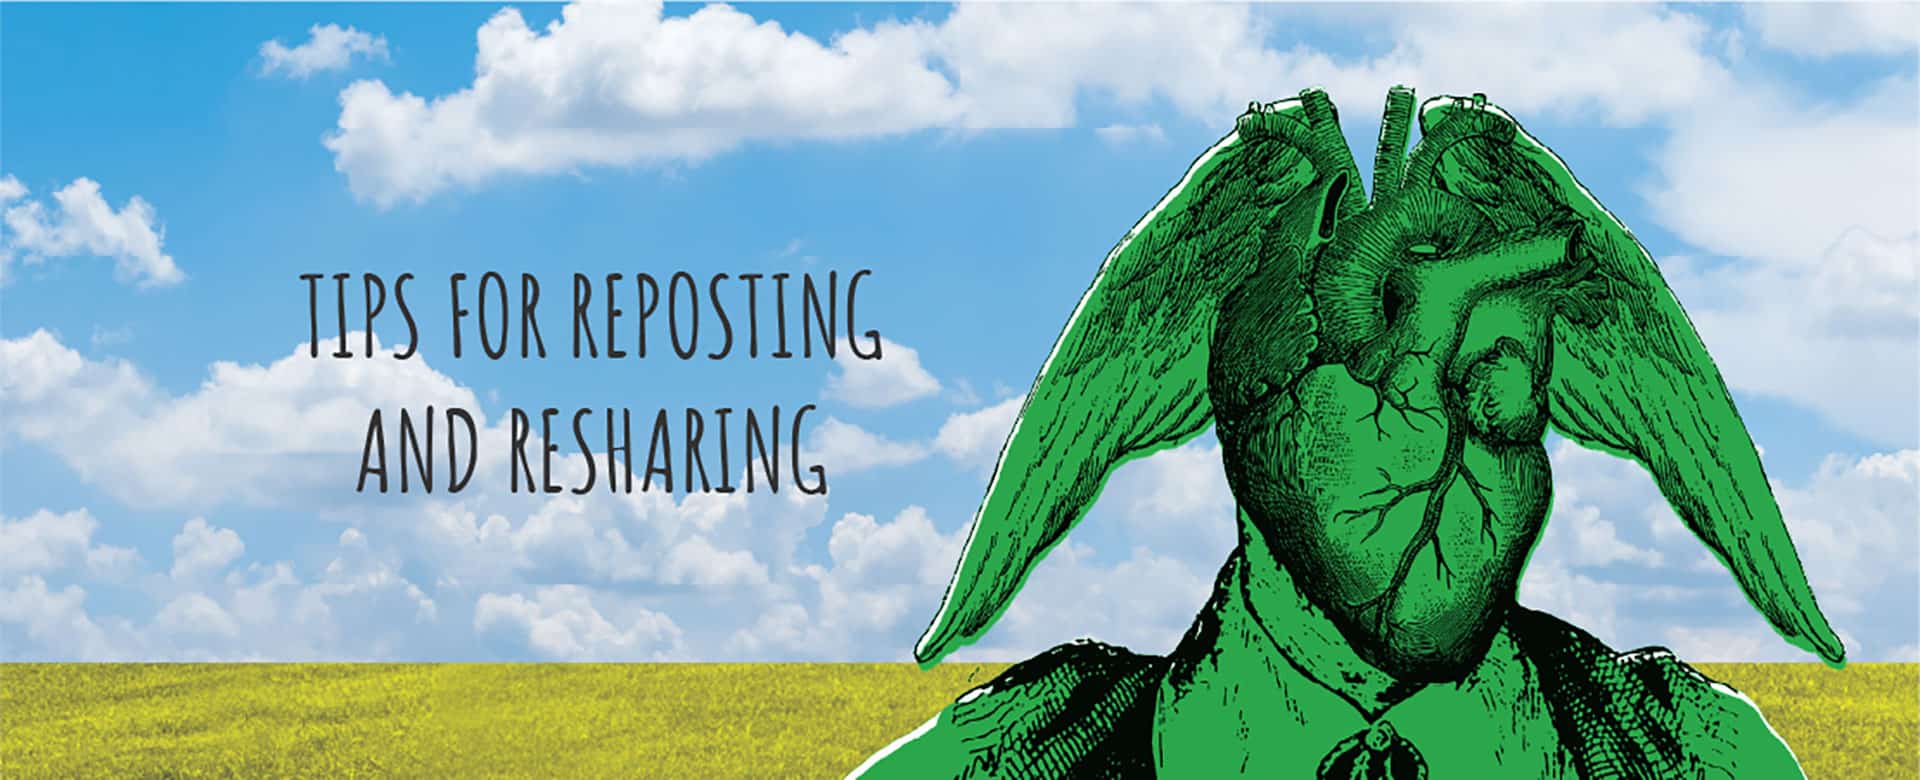 Tips for Reposting and Resharing